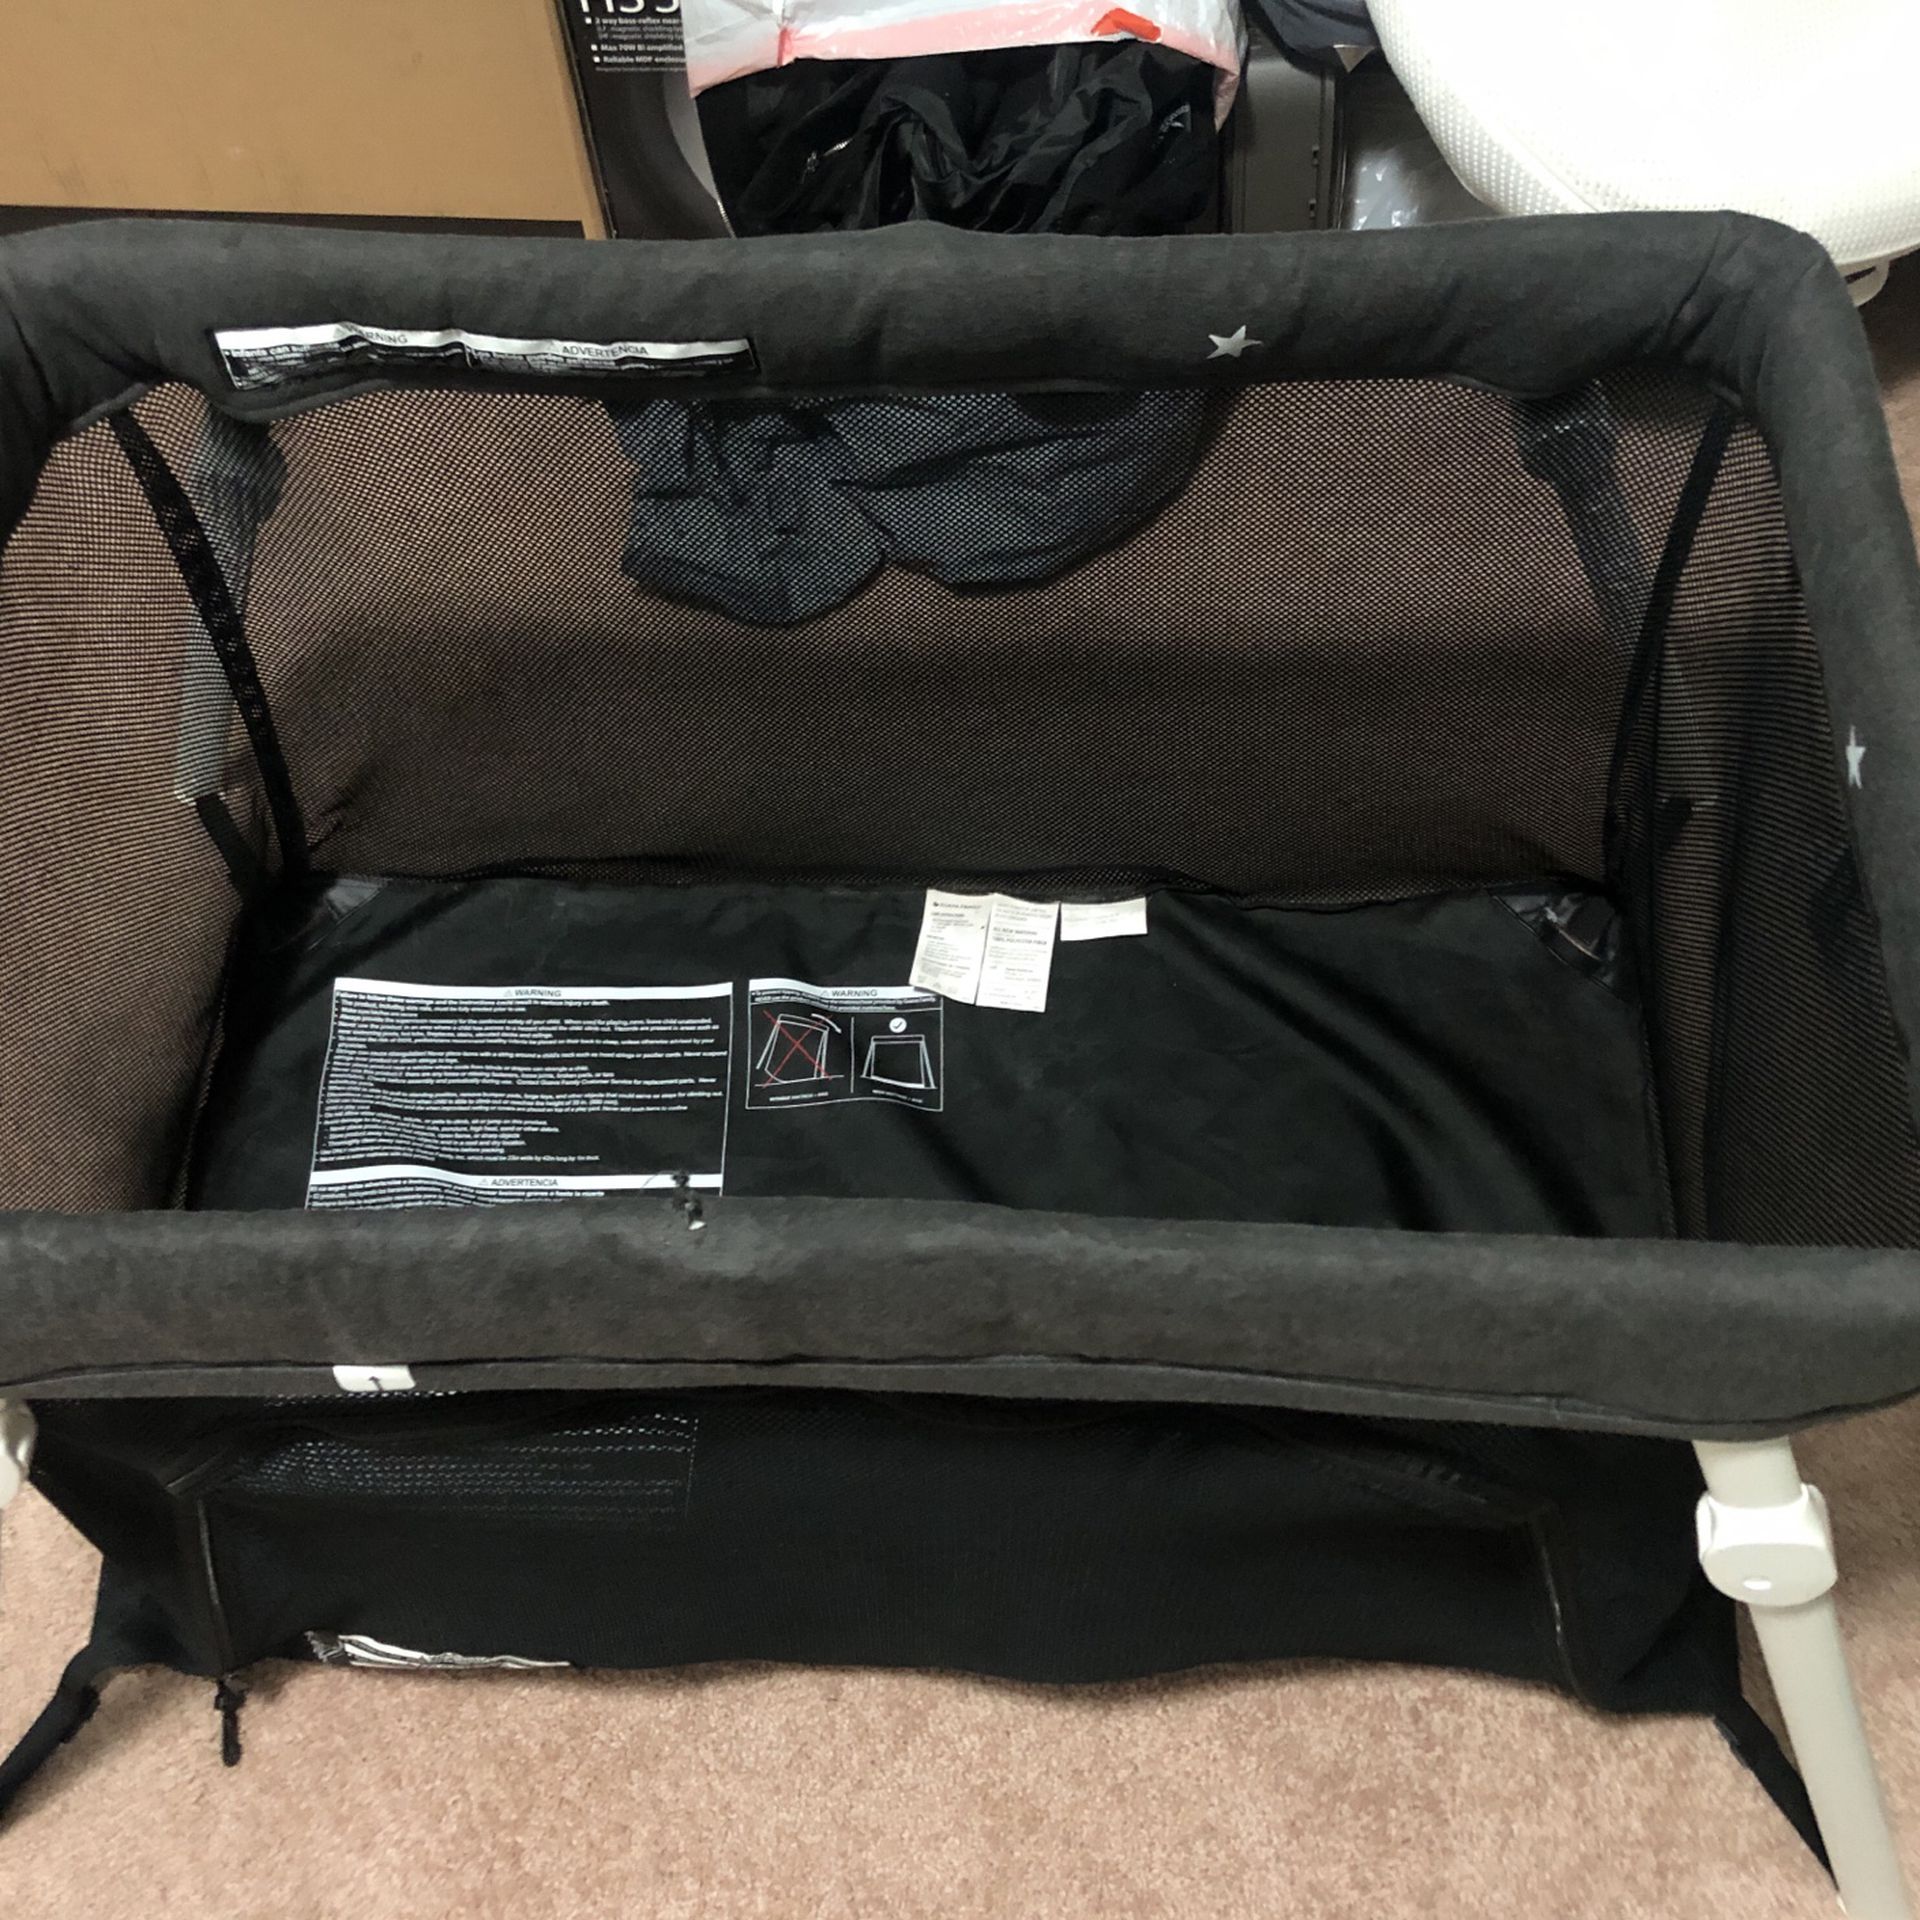 Guava Foldable Crib For Travel